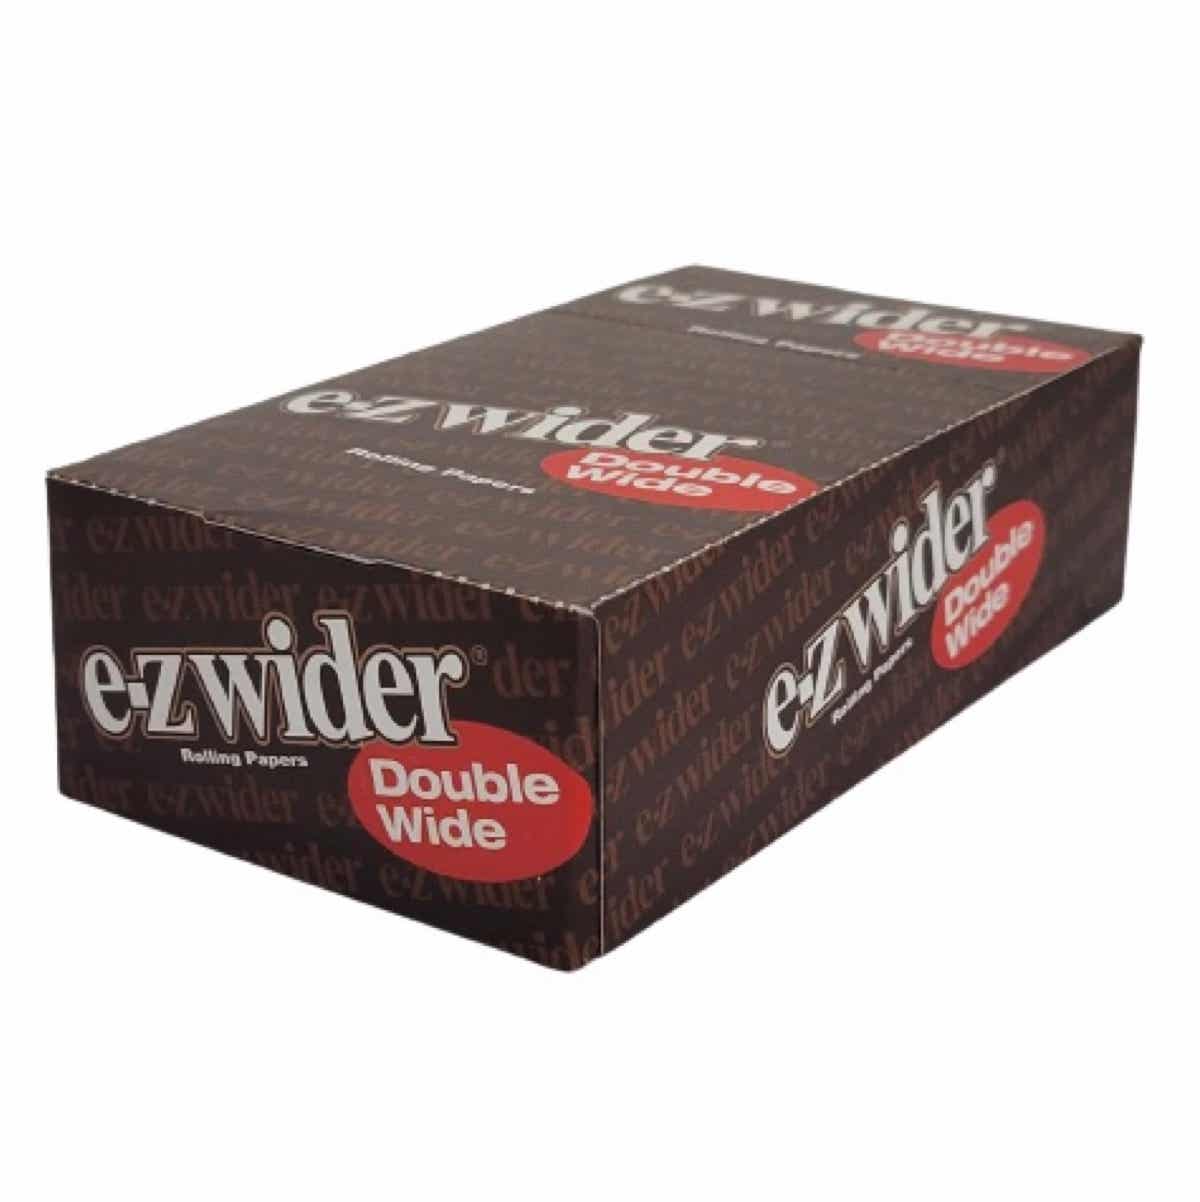 Epic Wholesale - EZWider Papers